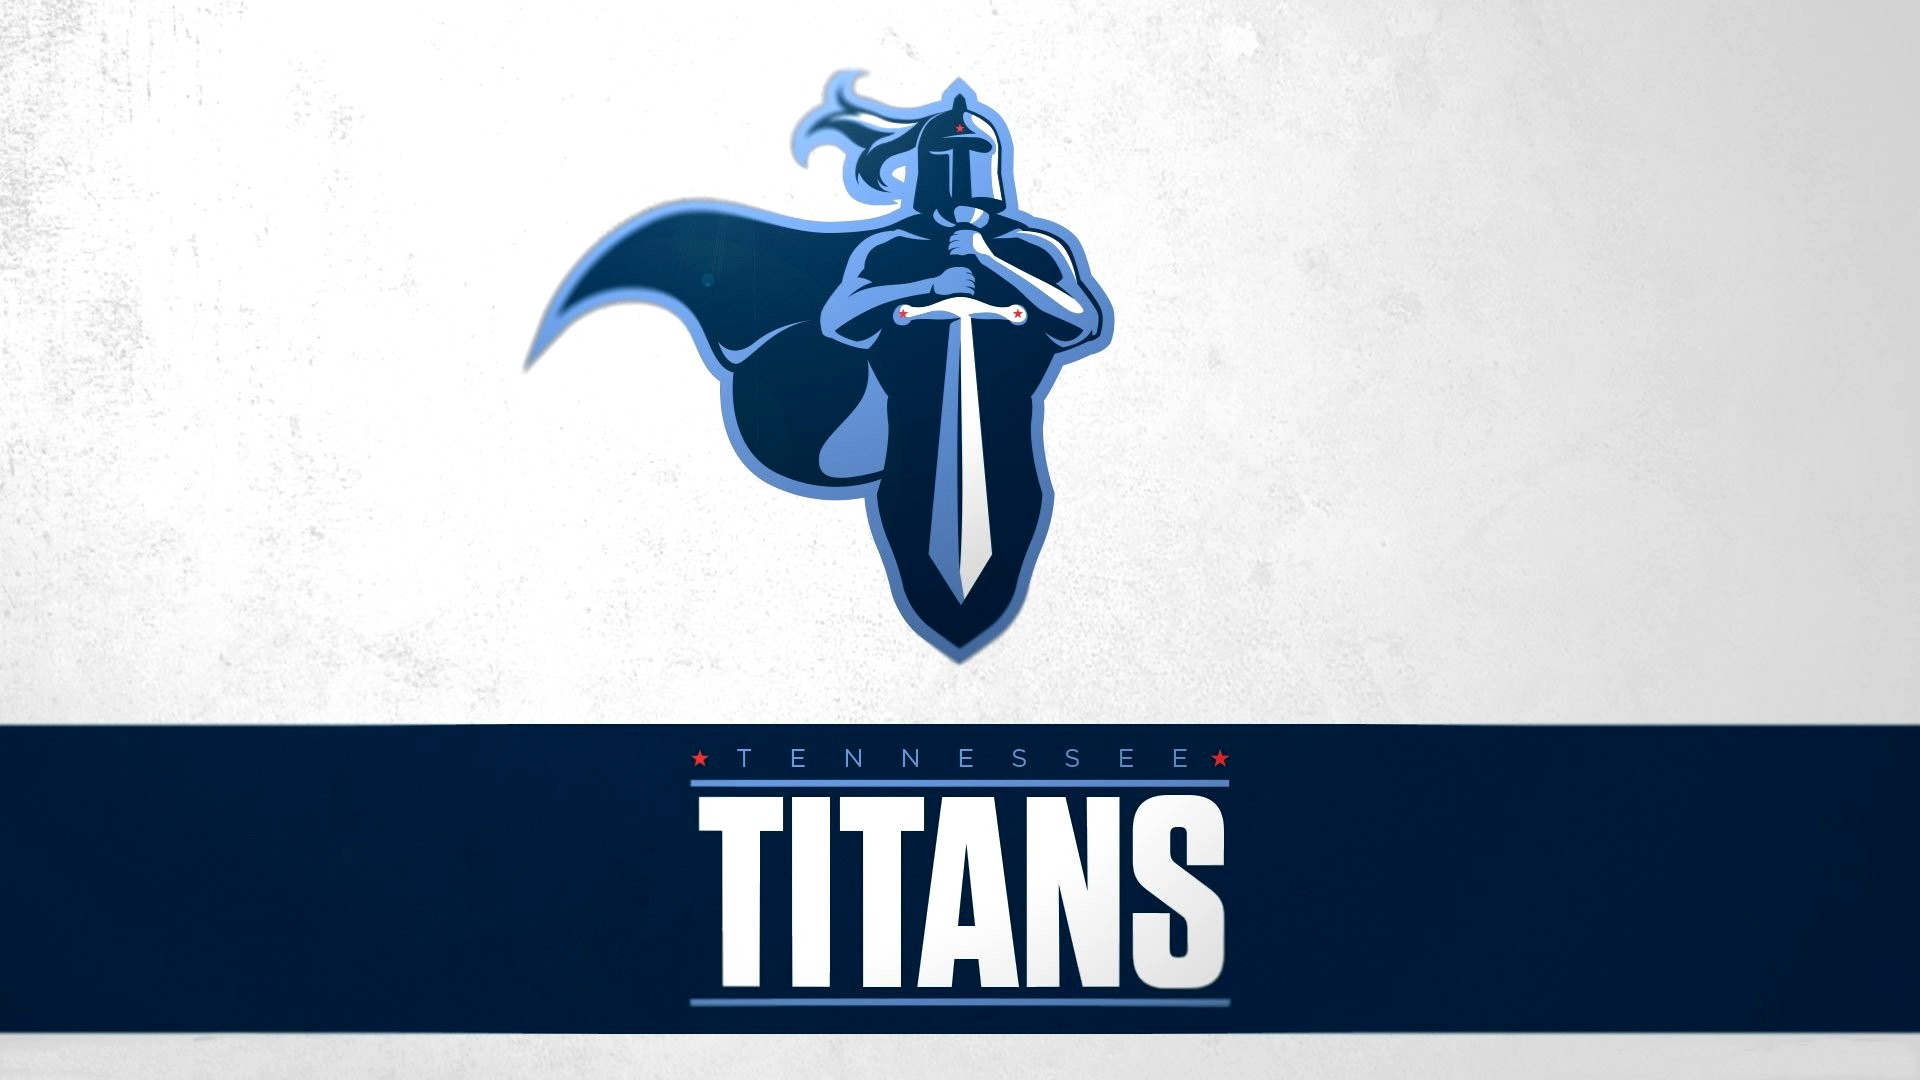 Tennessee Titans Backgrounds HD with high-resolution 1920x1080 pixel. You can use and set as wallpaper for Notebook Screensavers, Mac Wallpapers, Mobile Home Screen, iPhone or Android Phones Lock Screen